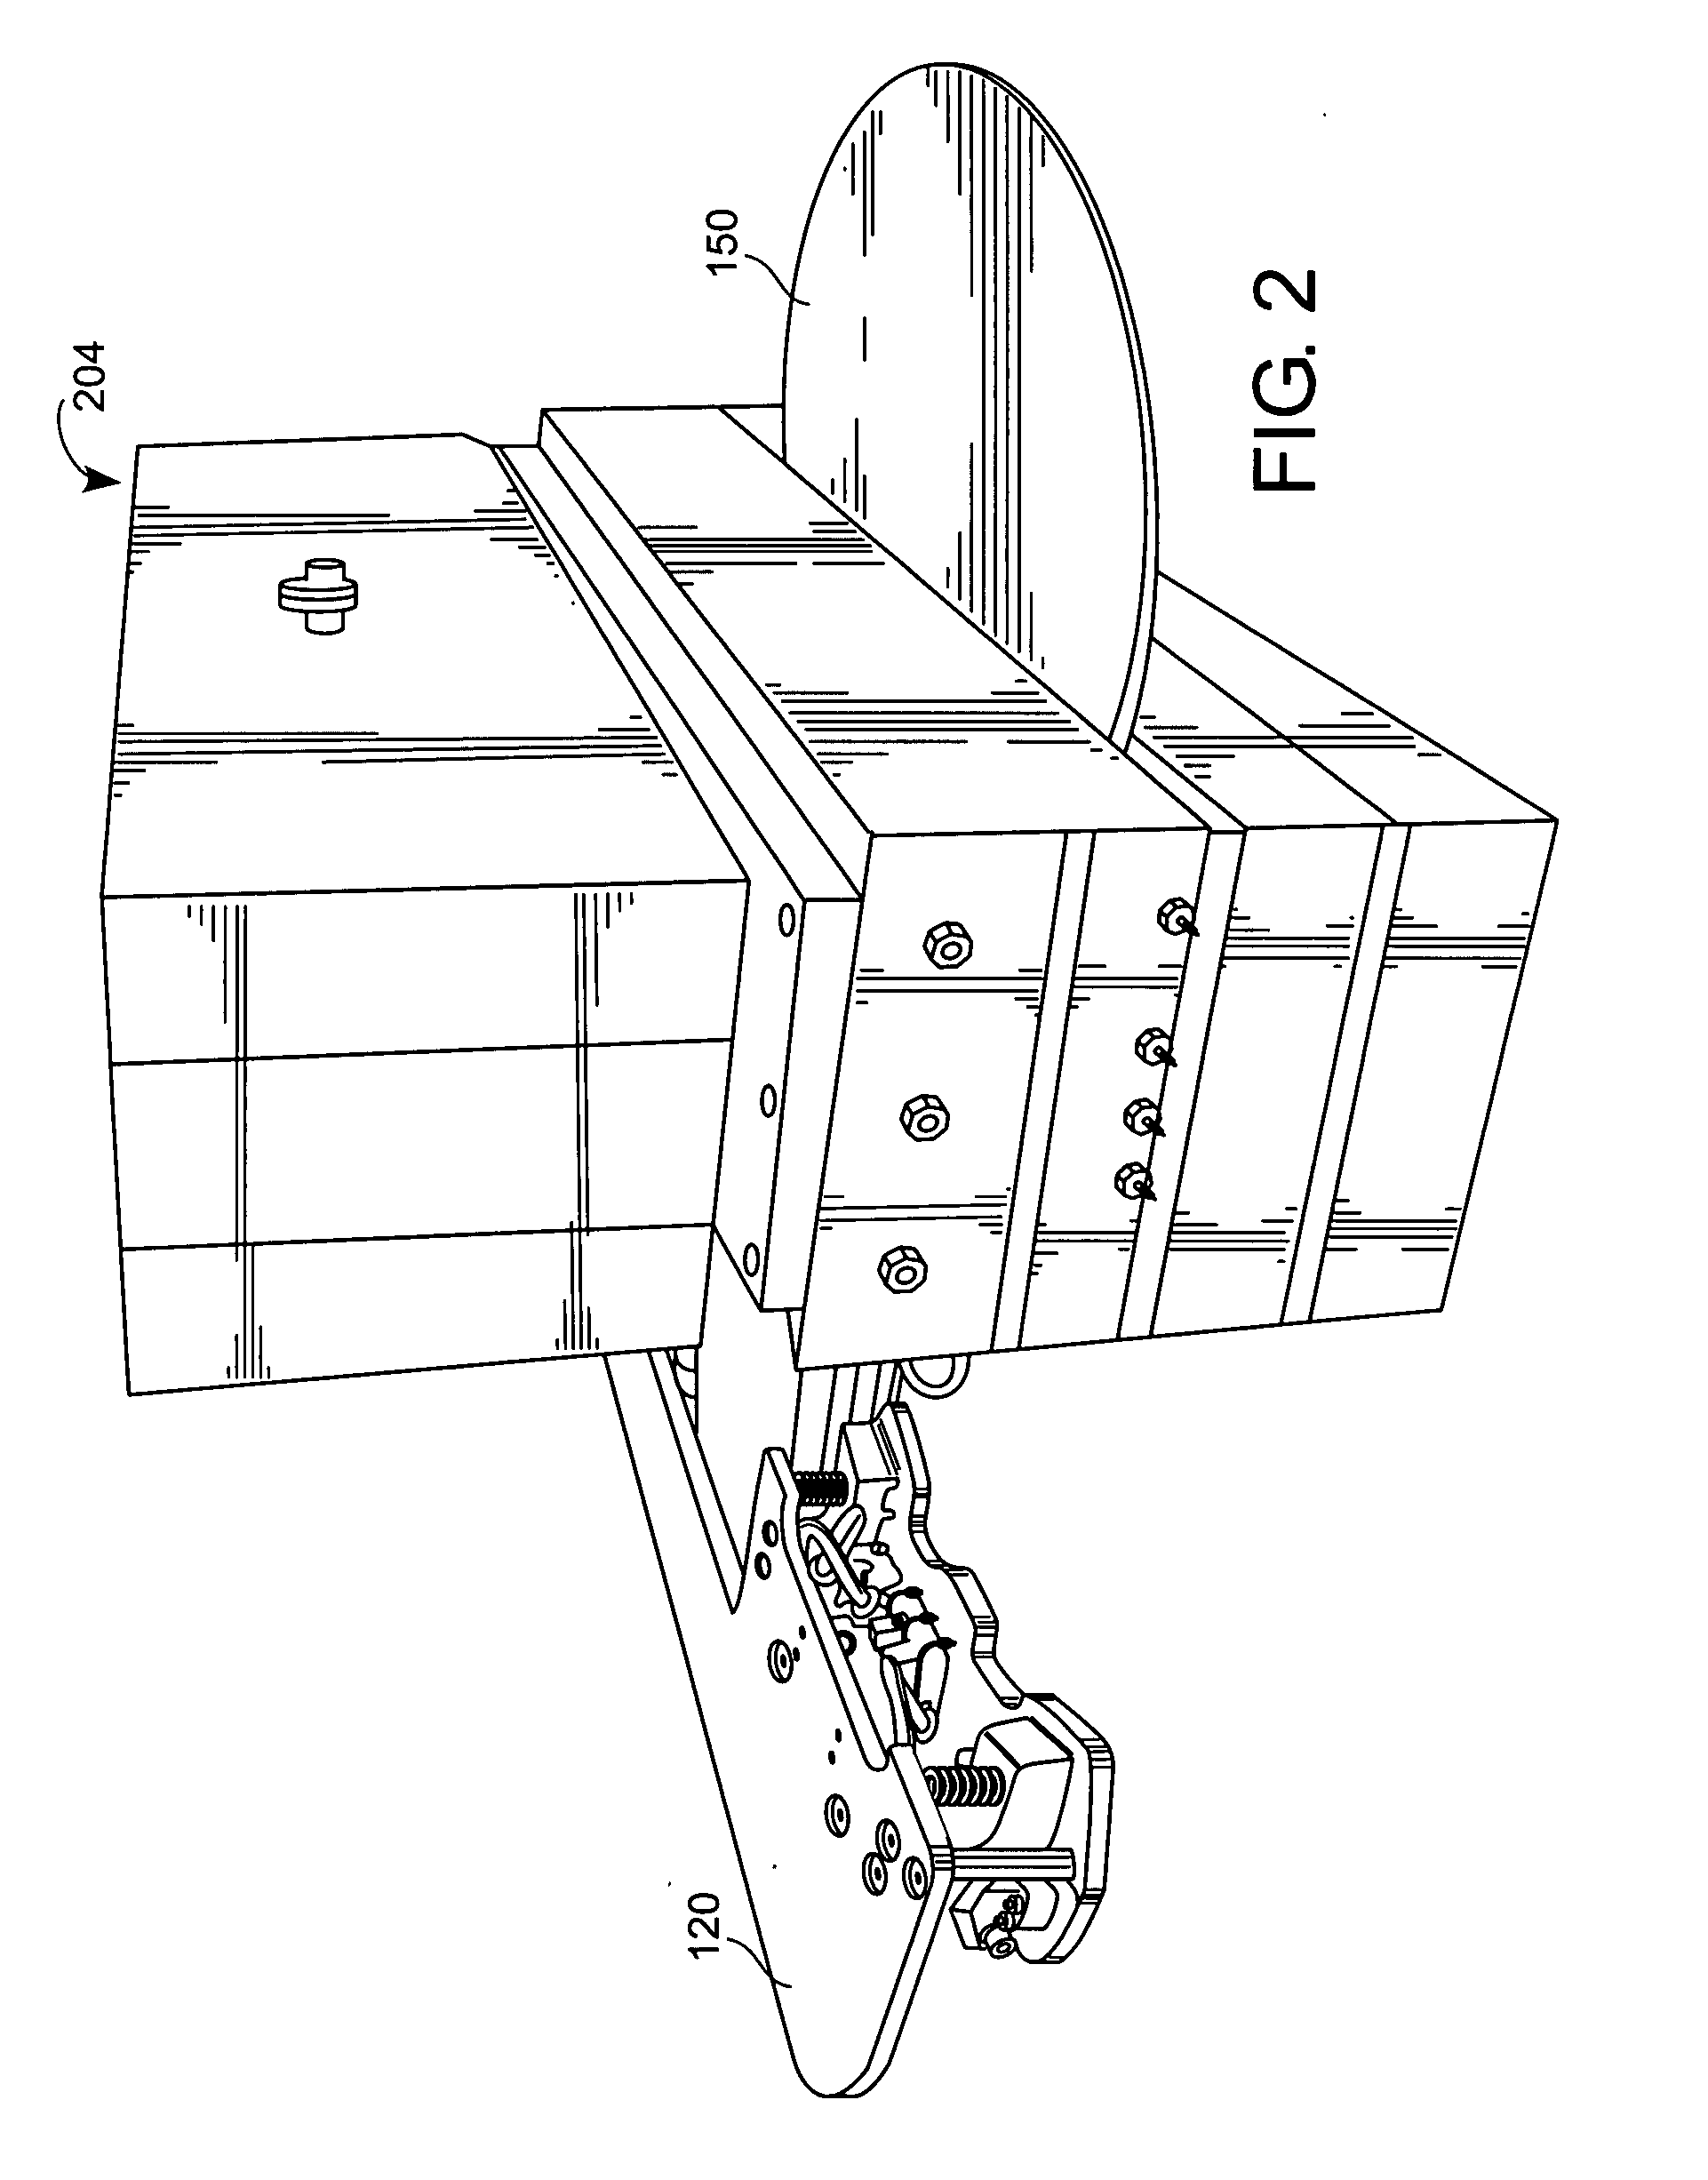 Substrate gripper with integrated electrical contacts